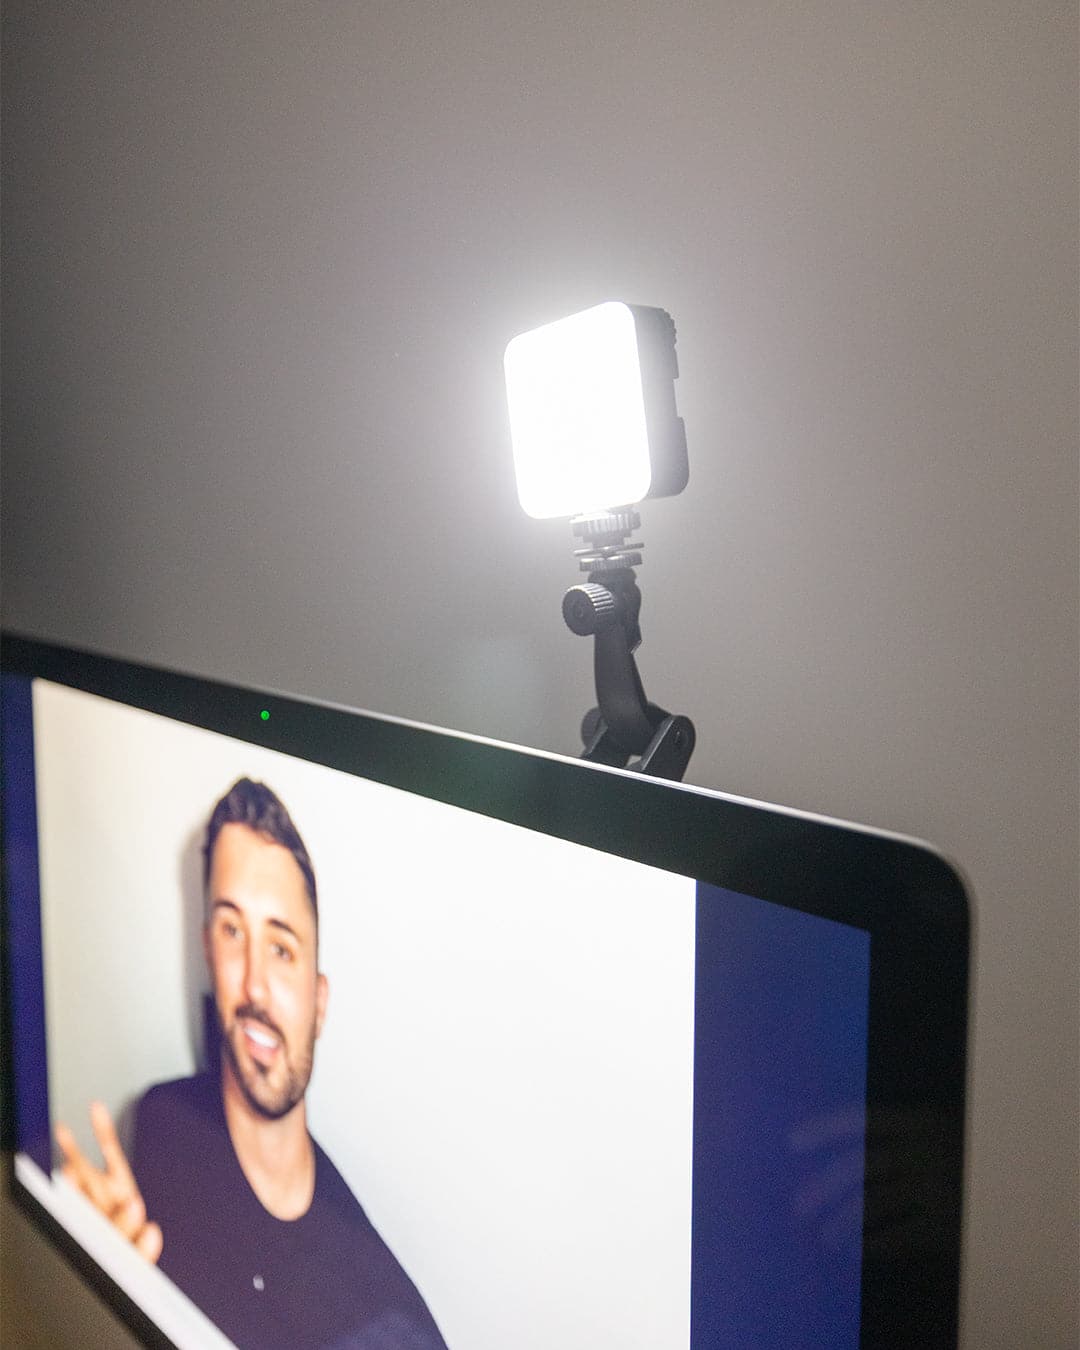 Spectrum Pocket Zoom LED Light With Suction Cup for Laptop/Monitor - GlowGo